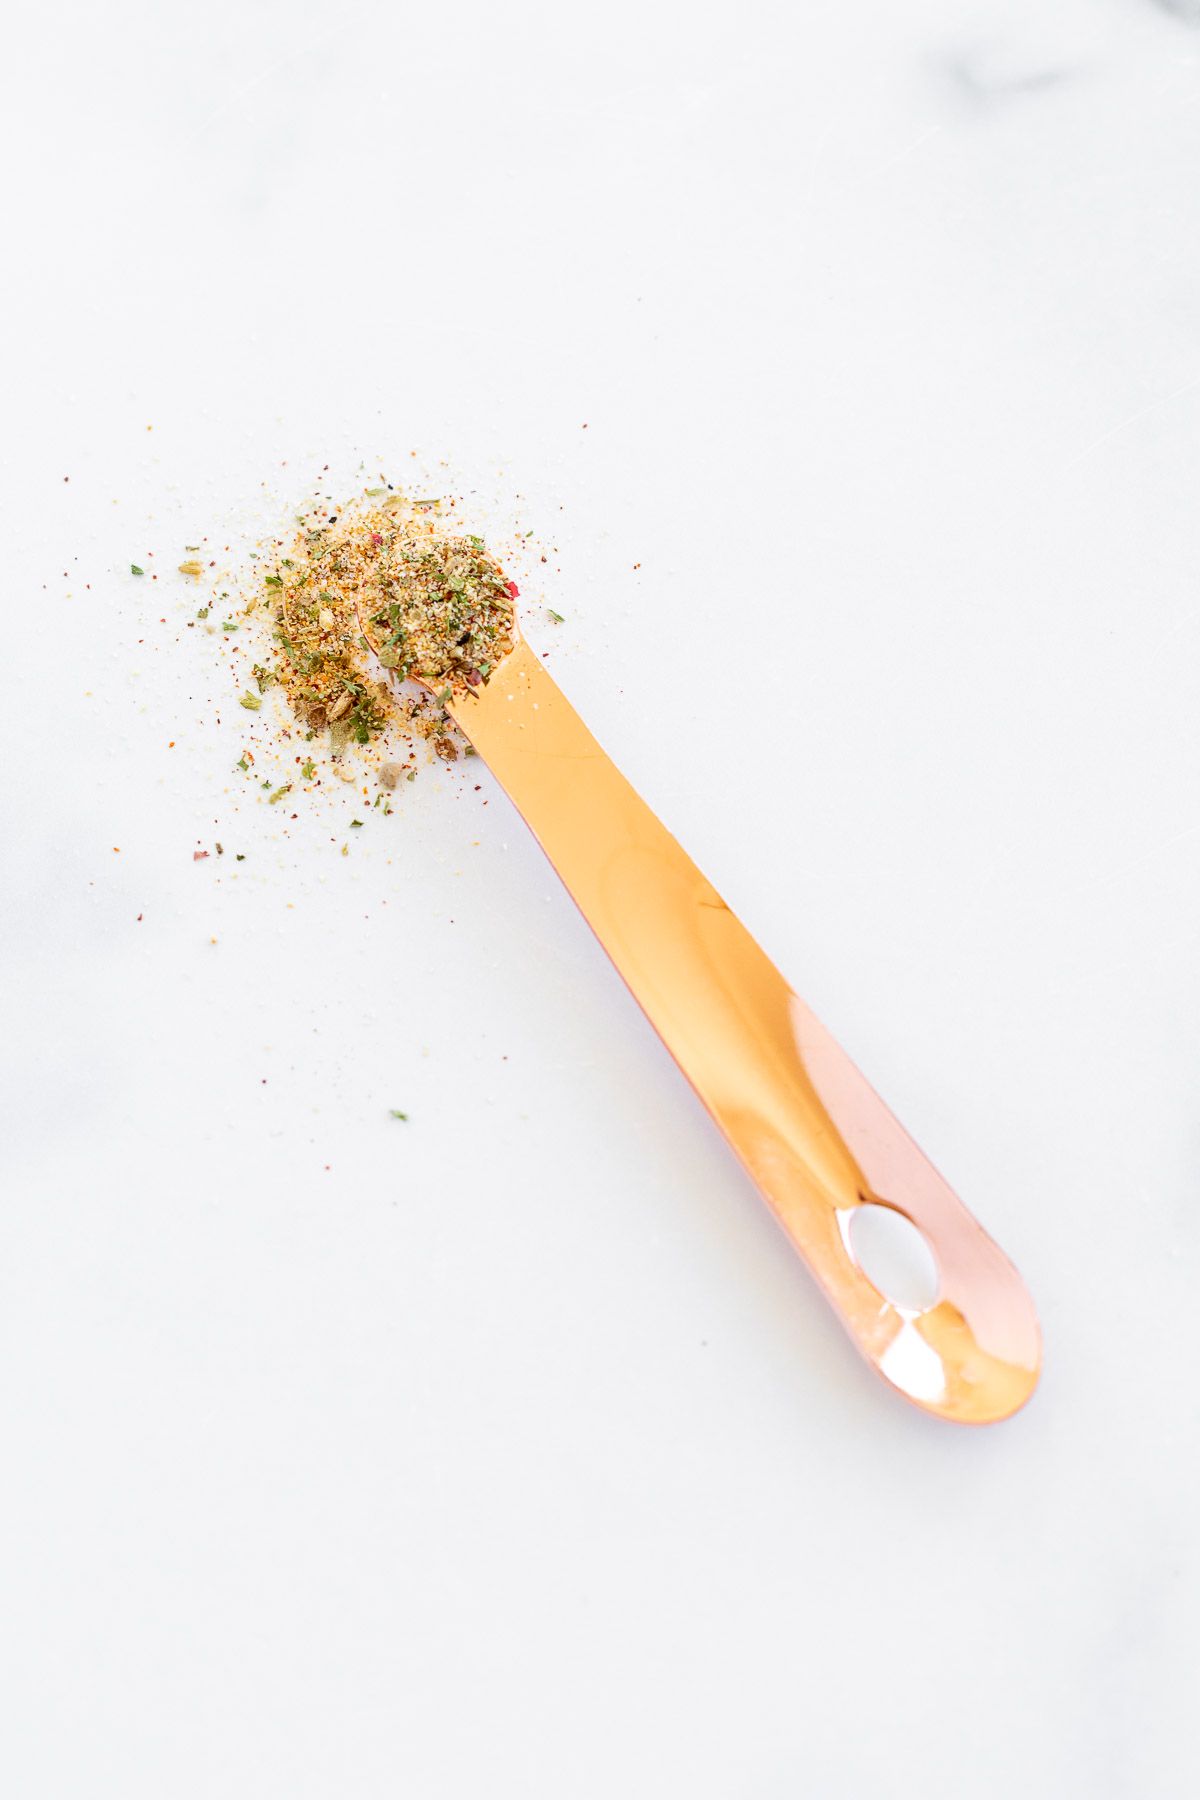 A copper teaspoon placed on a marble table top with all purpose spice.